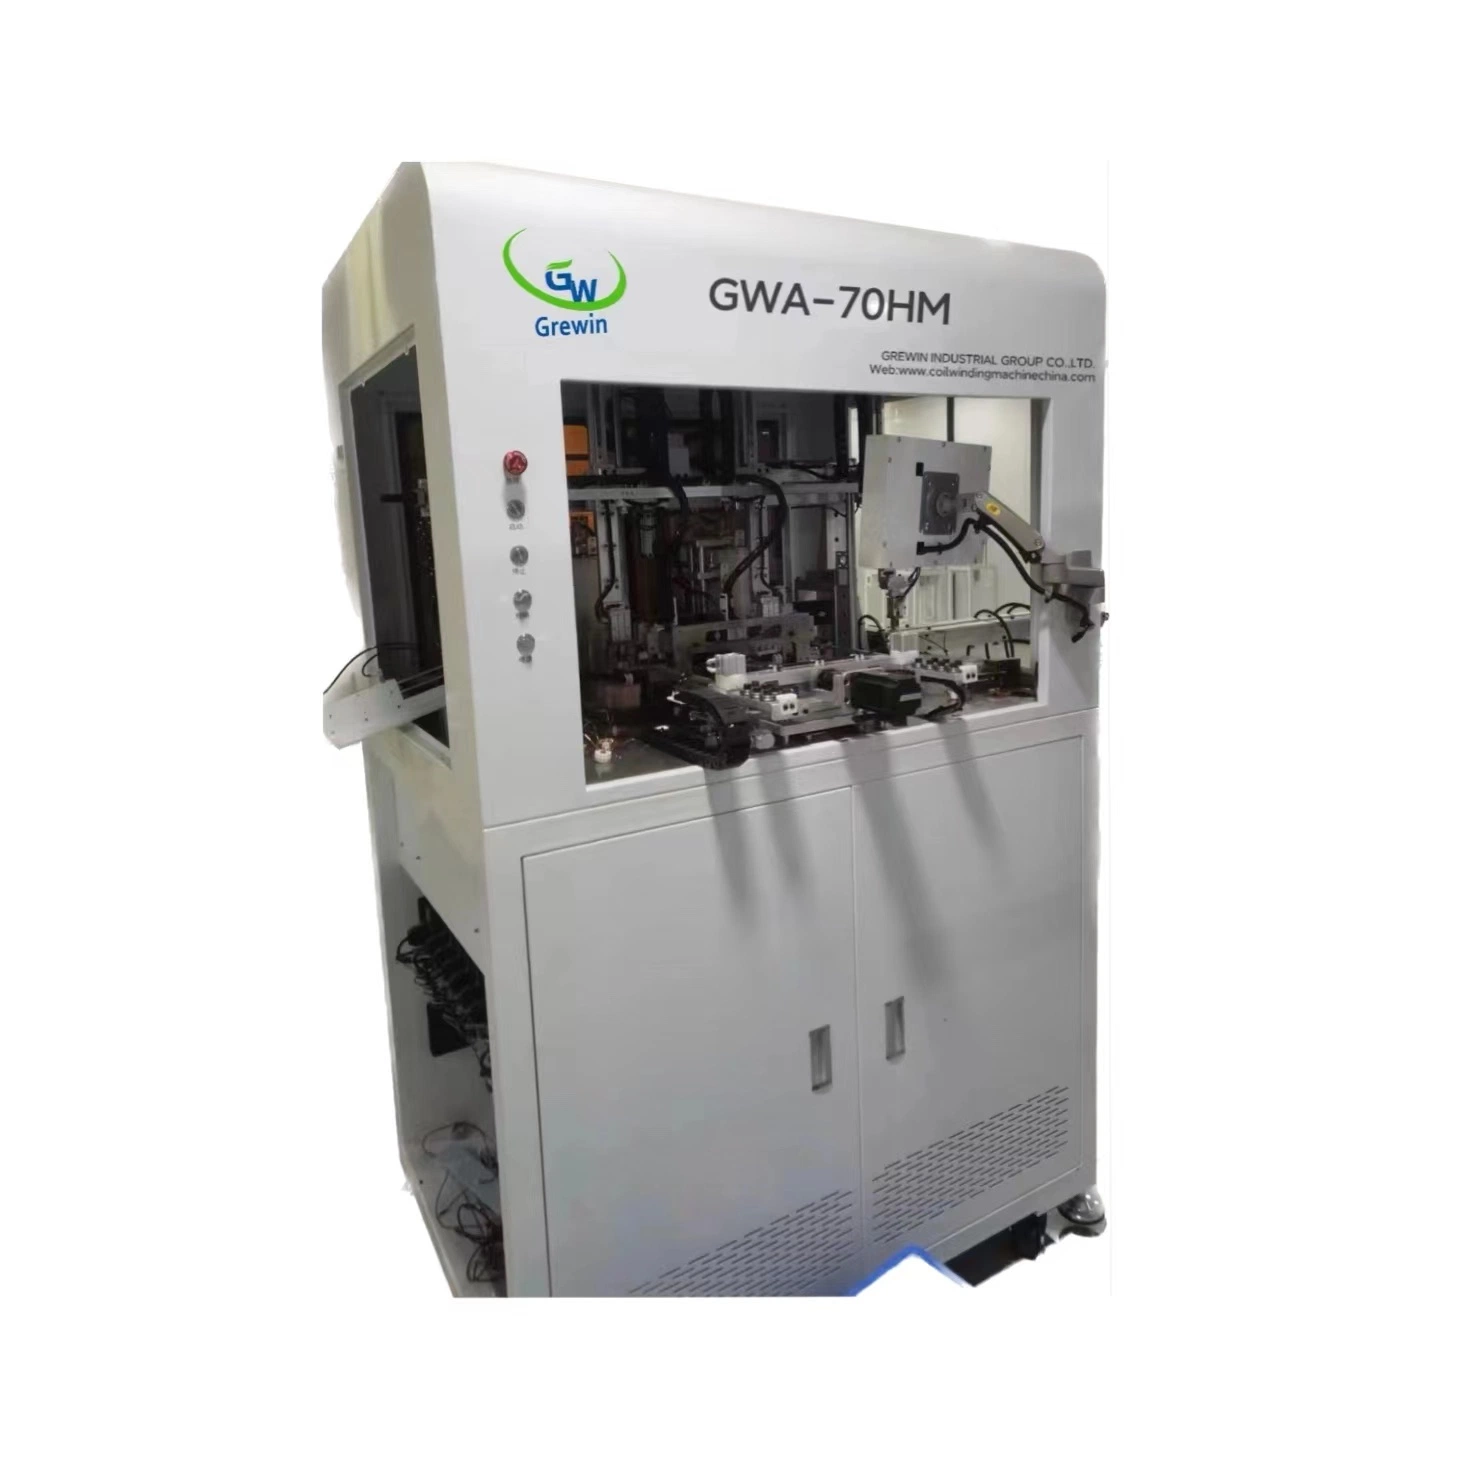 0.5mm-2.0mm Toroidal Fully Automatic Coil Winding Machine for Common Mode Inductor